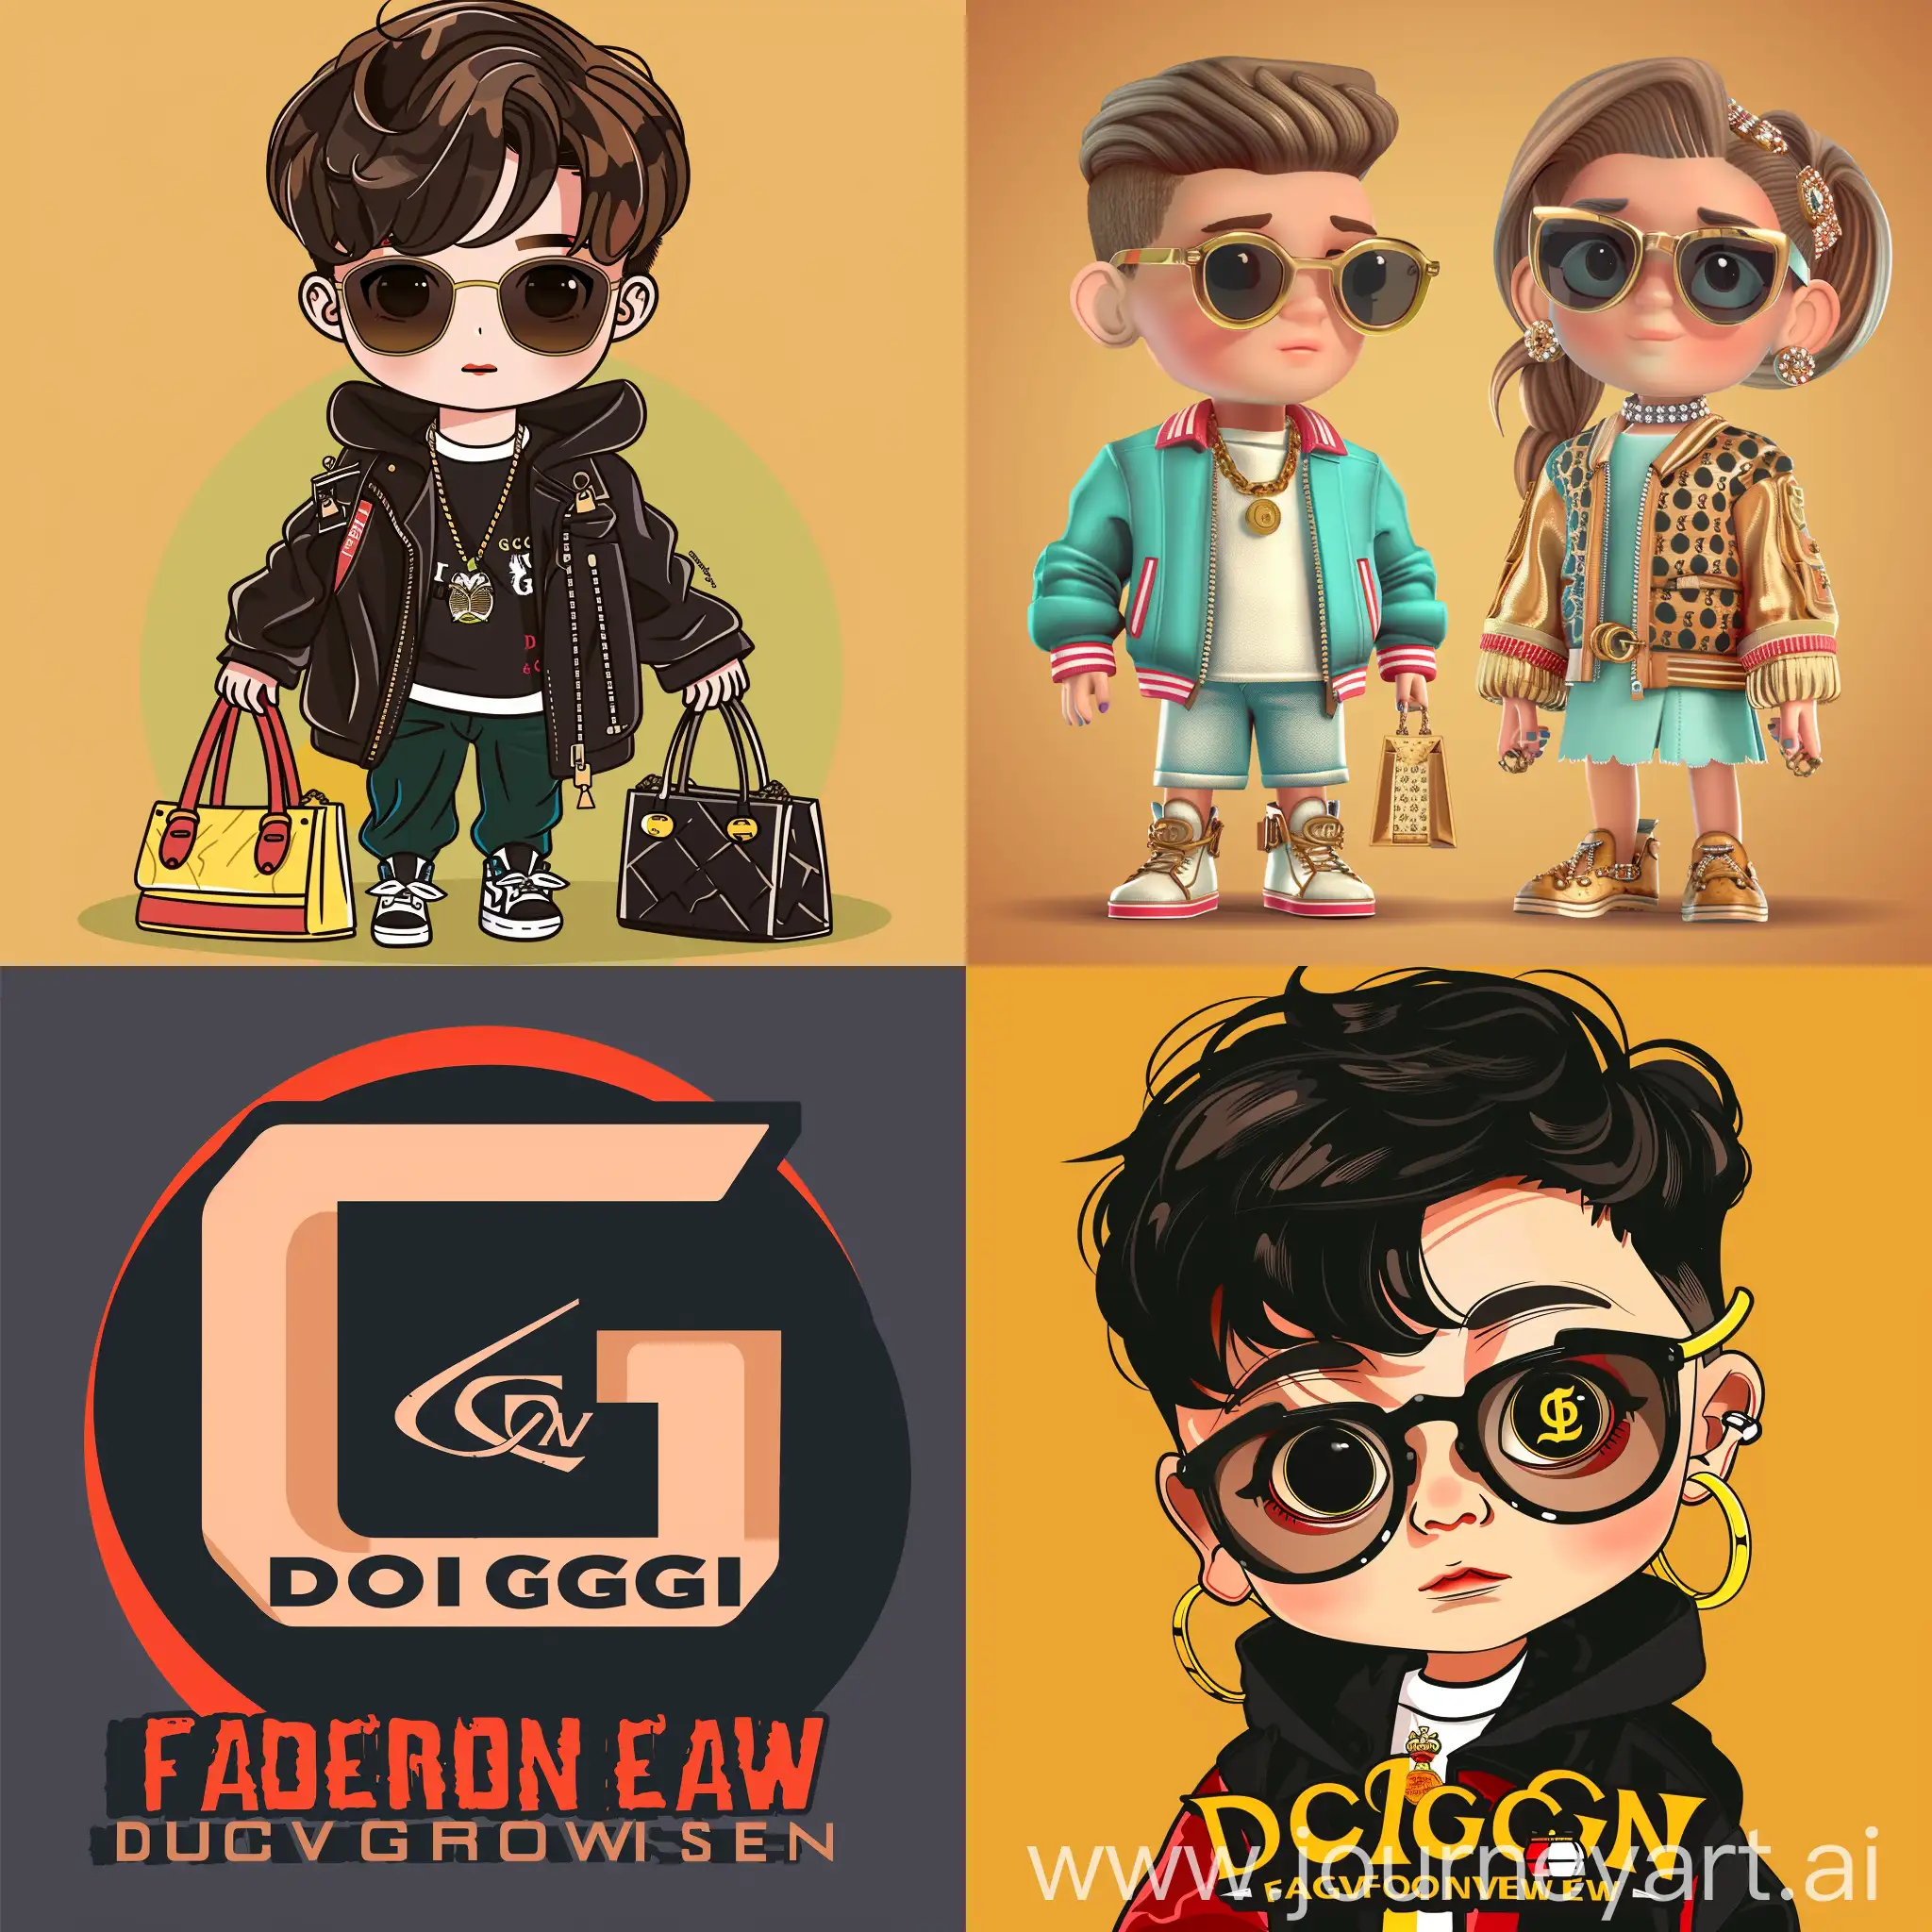 Logo Fashion For Boys
"🎉 Exciting News 🎉 We are thrilled to announce the grand opening of our new fashion store! 🛍️ Don't miss out on our exclusive Flash Sale with 20% off on all items! ✨ Get ready to indulge in the latest collections from renowned fashion houses like Gucci, Dolce & Gabbana, Burberry, and more! See you there! #FashionForward #GrandOpening"